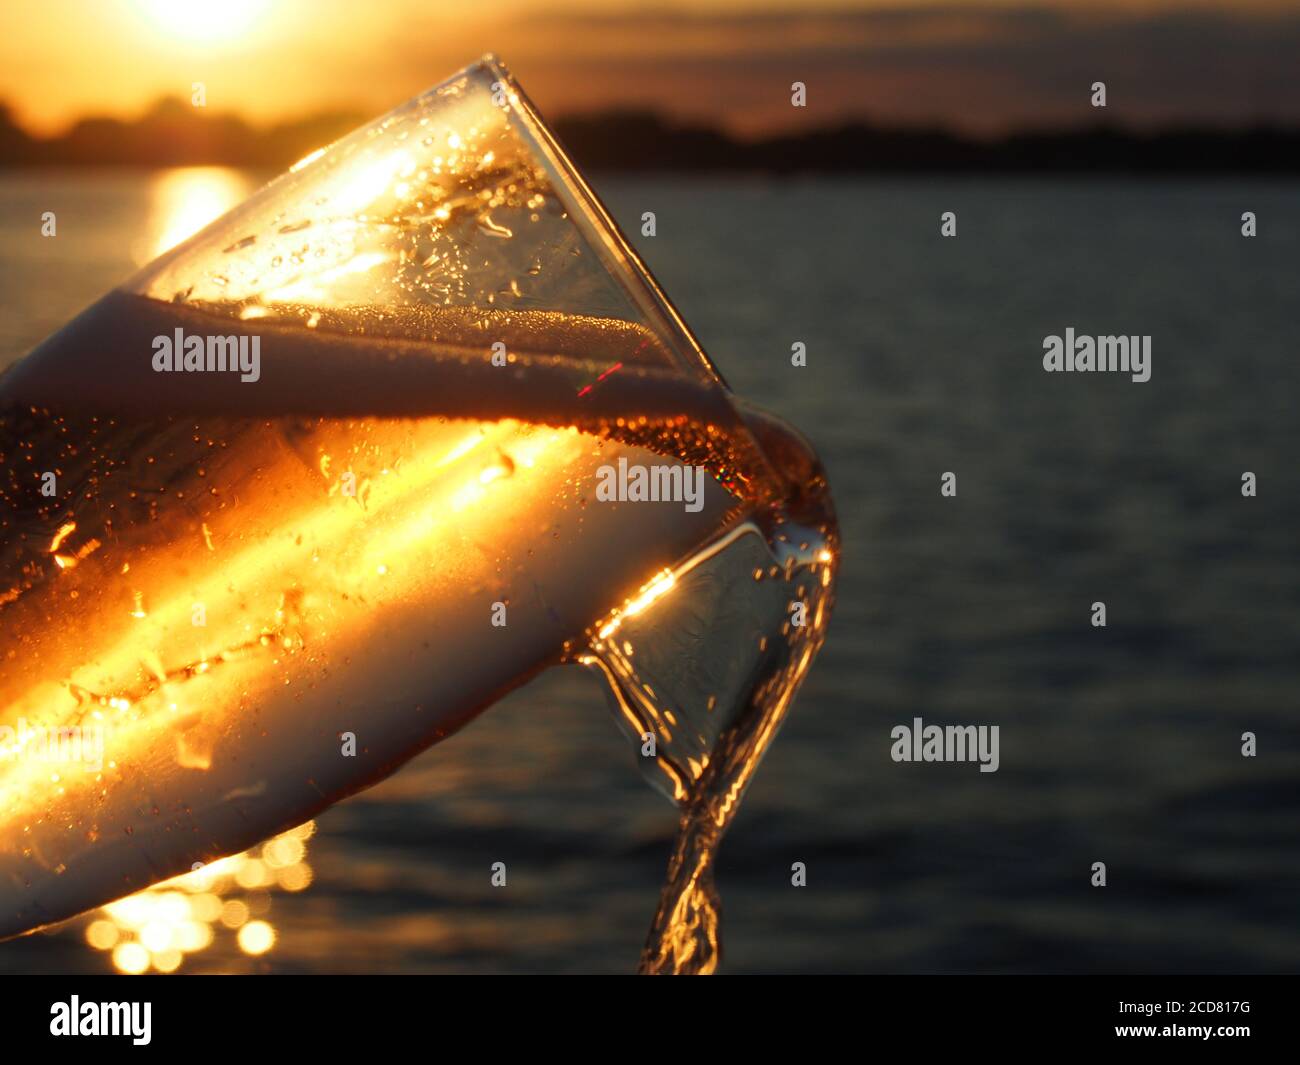 Champagne' Being Poured Against Lake Sunset Stock Photo